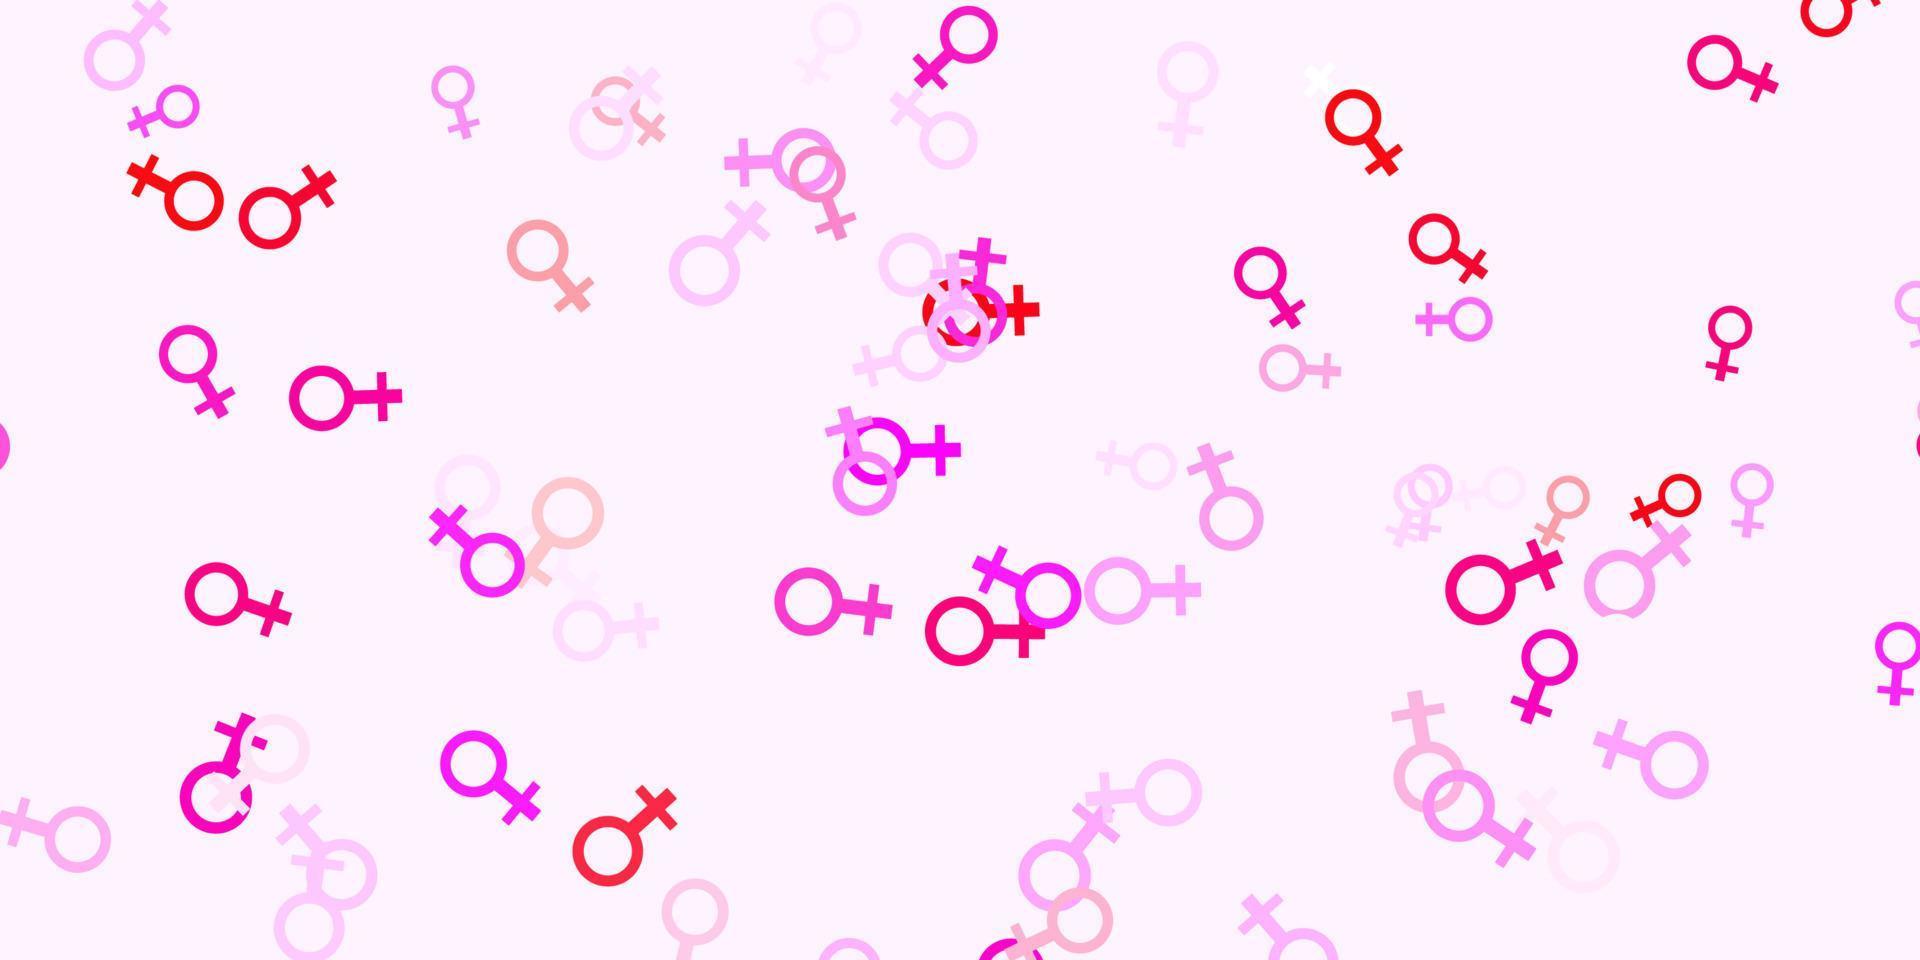 Light Red, Yellow vector pattern with feminism elements.